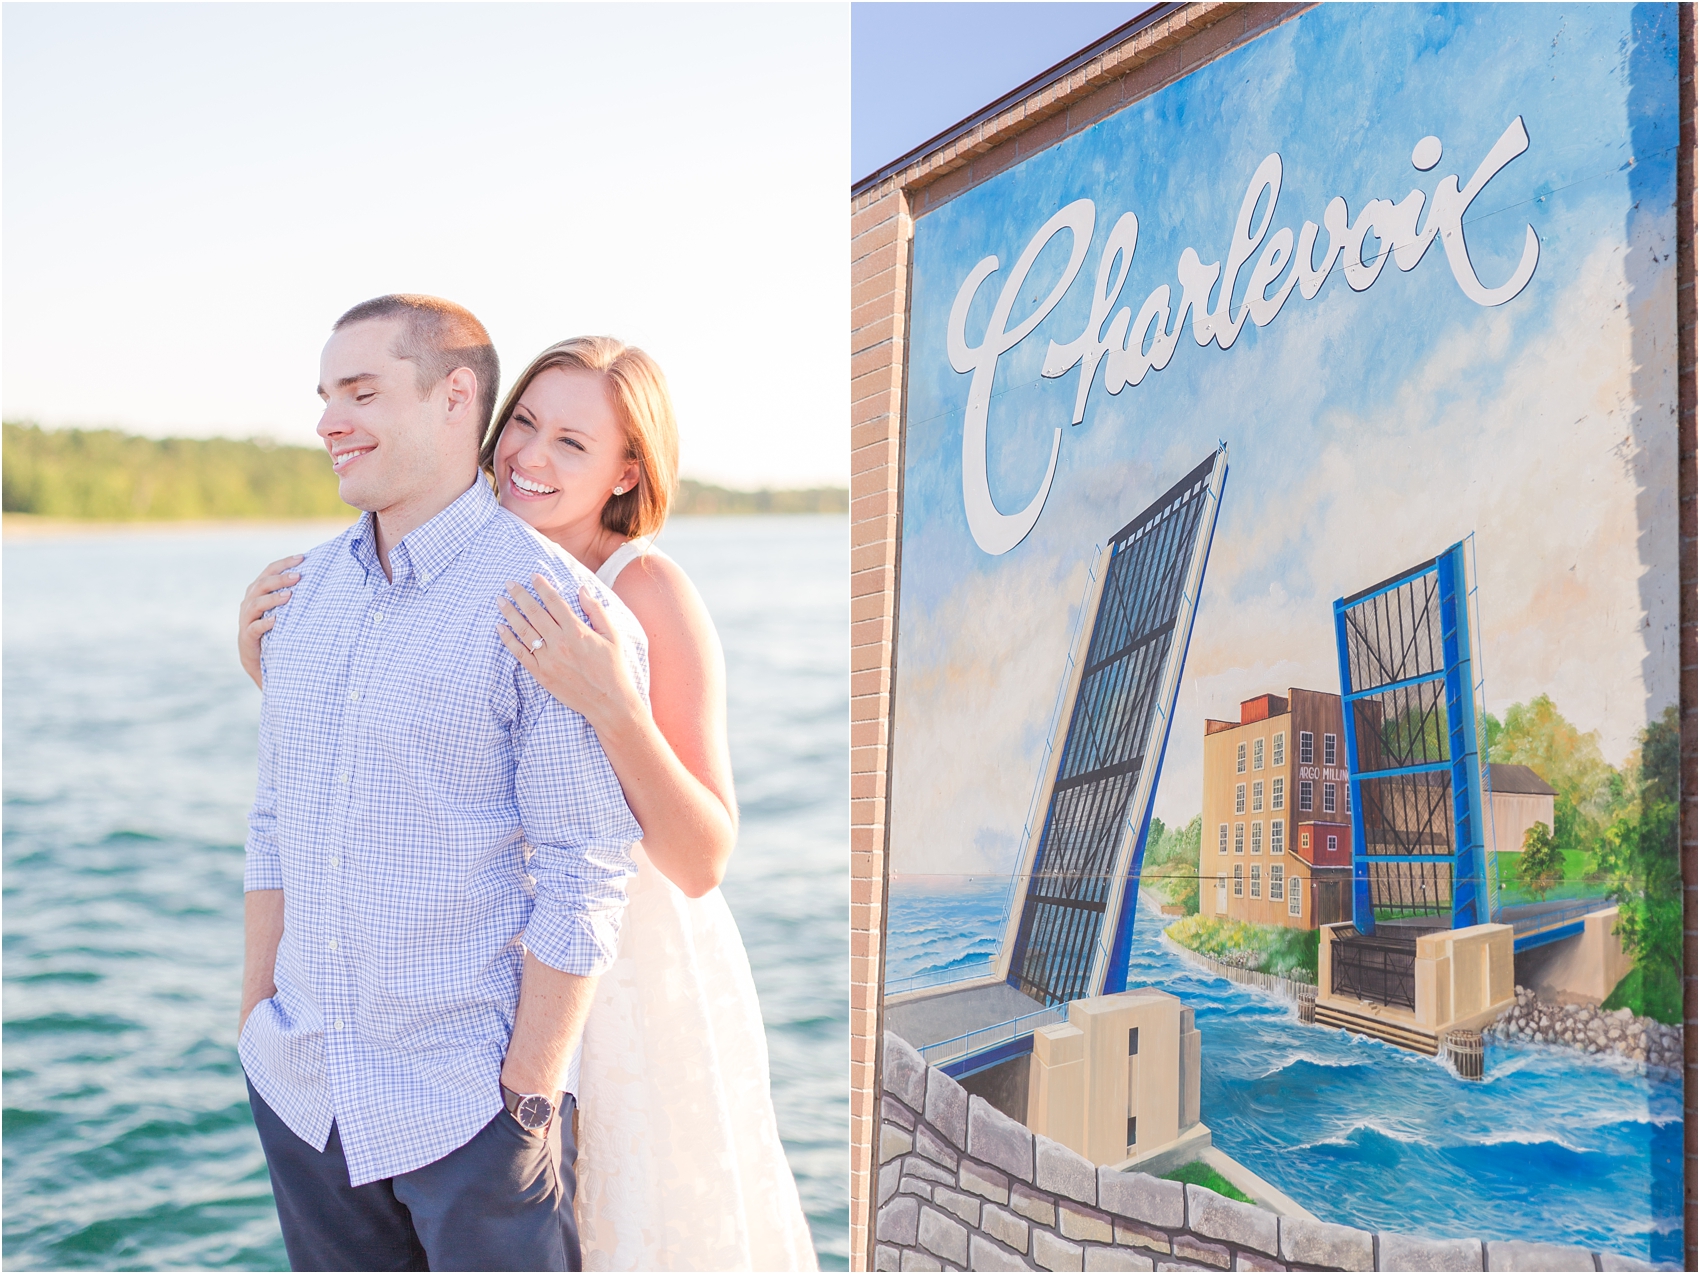 romantic-sunset-engagement-photos-in-downtown-charlevoix-mi-by-courtney-carolyn-photography_0002.jpg